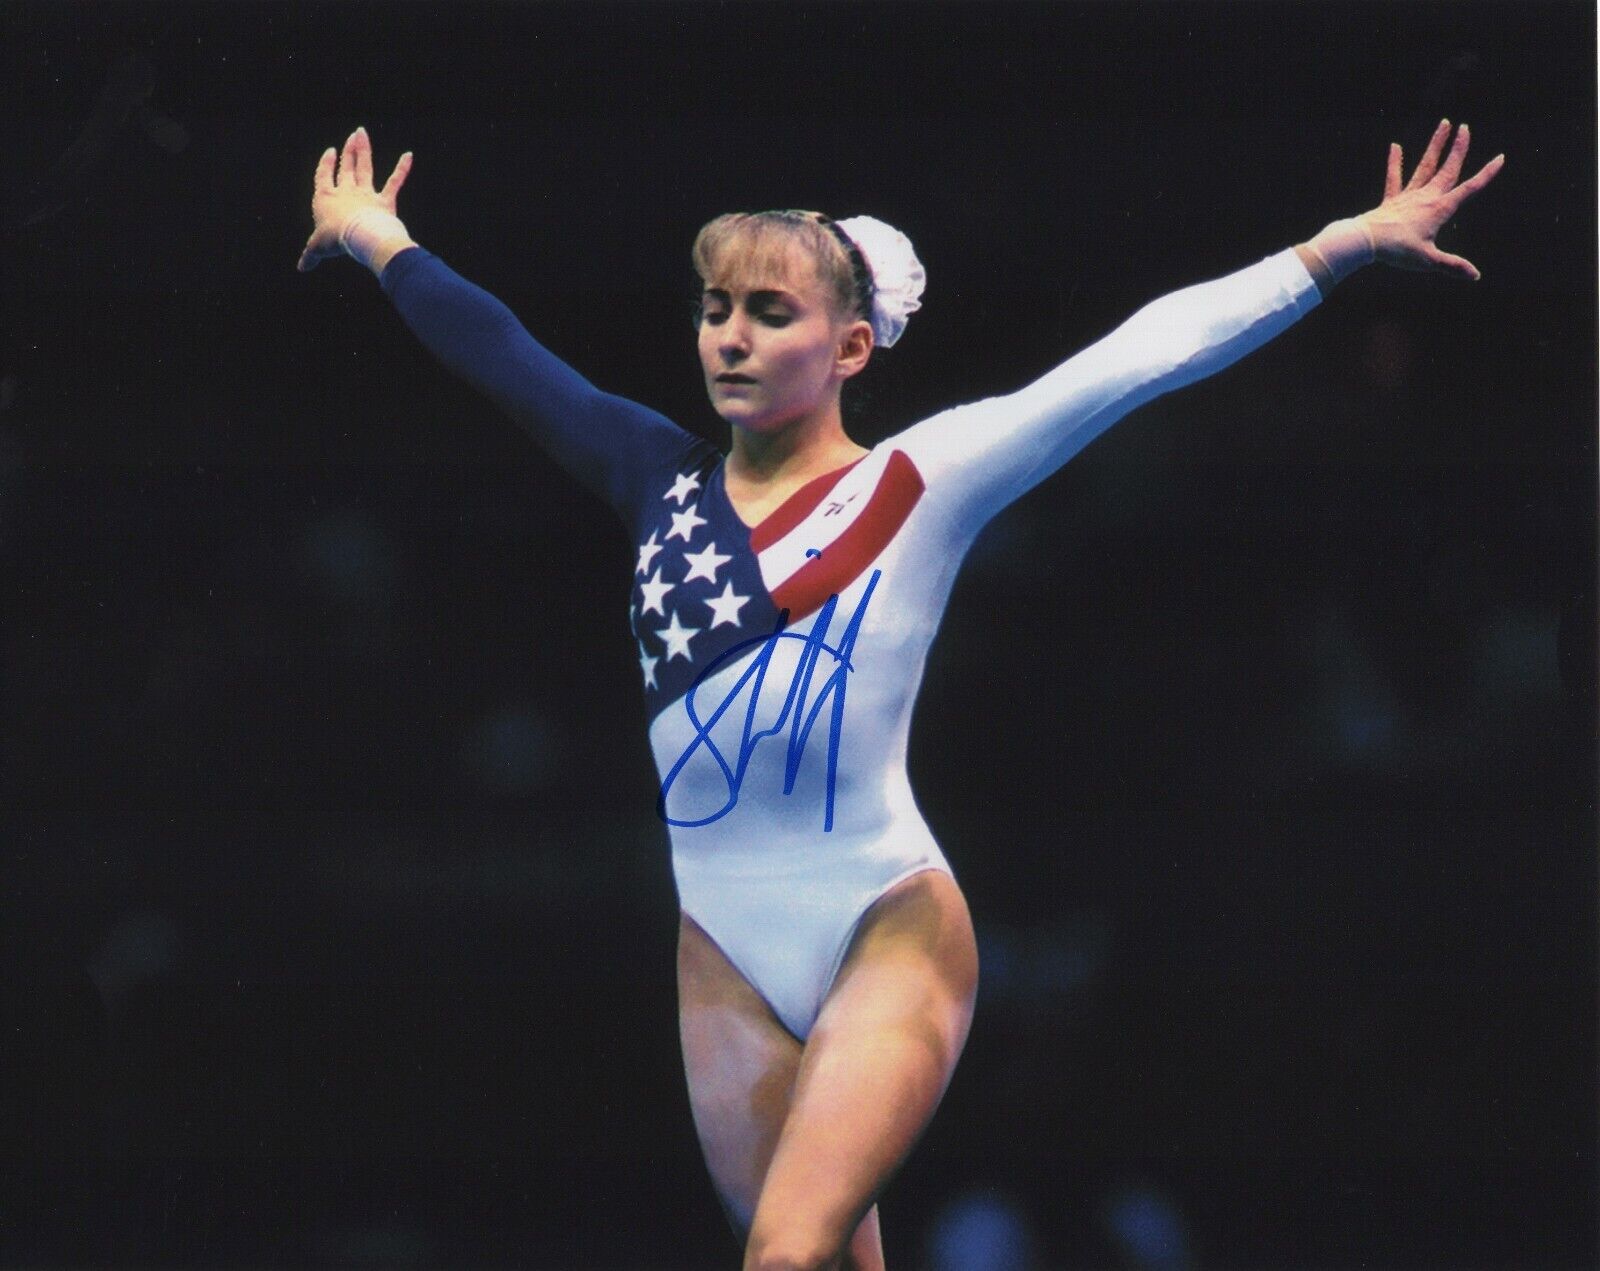 SHANNON MILLER SIGNED AUTOGRAPH USA OLYMPICS GYMNASTICS 8X10 Photo Poster painting GOLD MEDAL 3